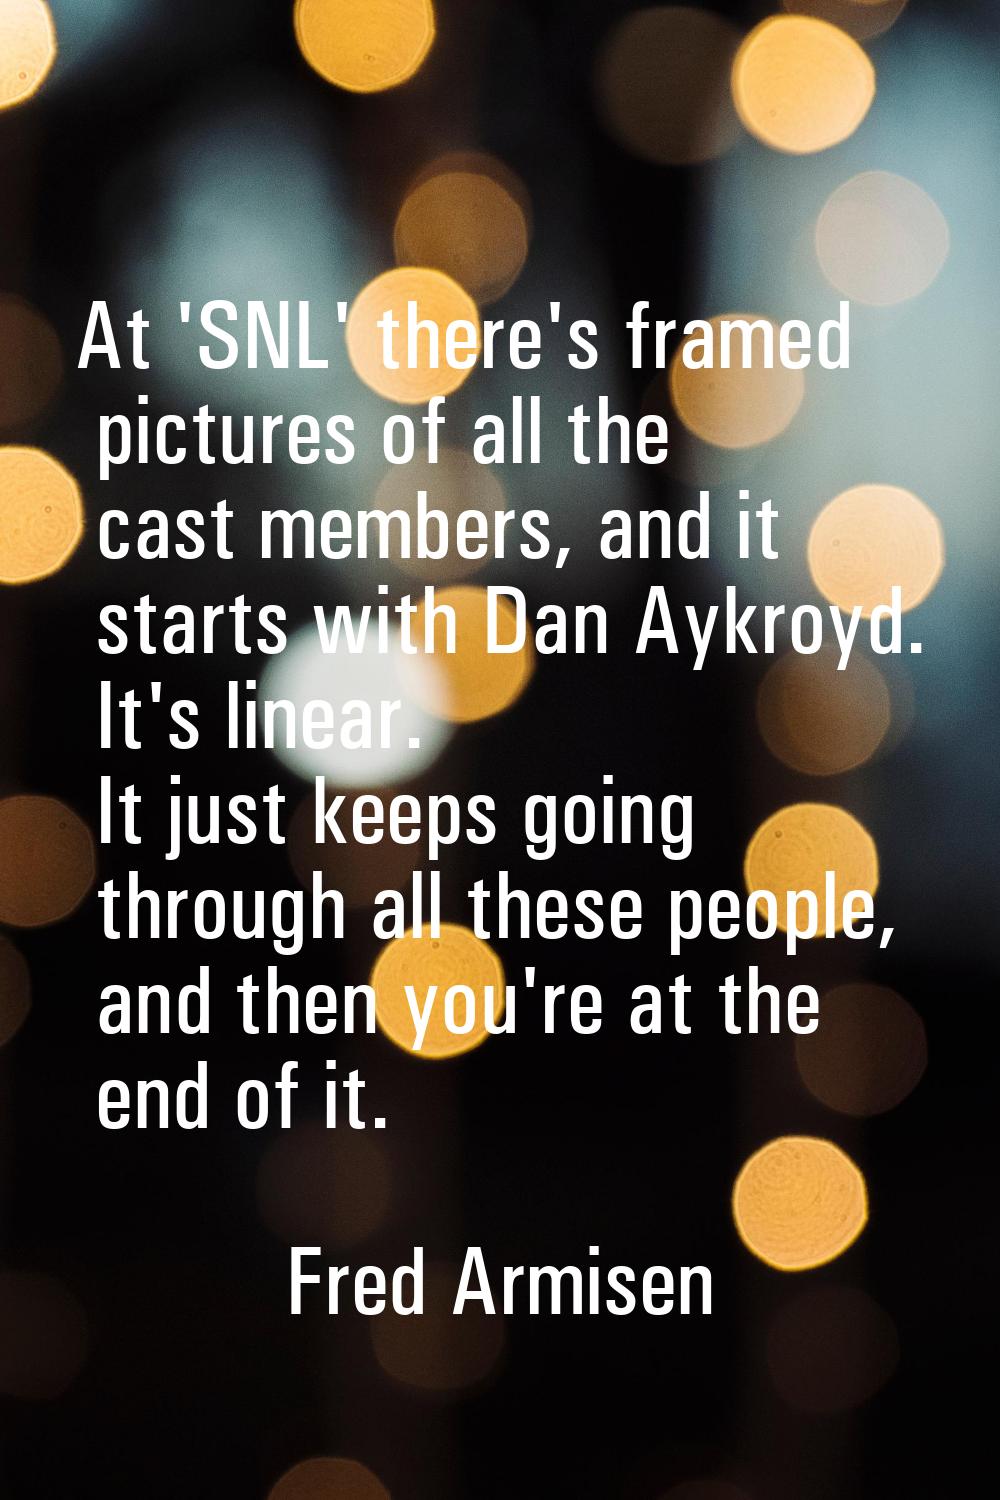 At 'SNL' there's framed pictures of all the cast members, and it starts with Dan Aykroyd. It's line